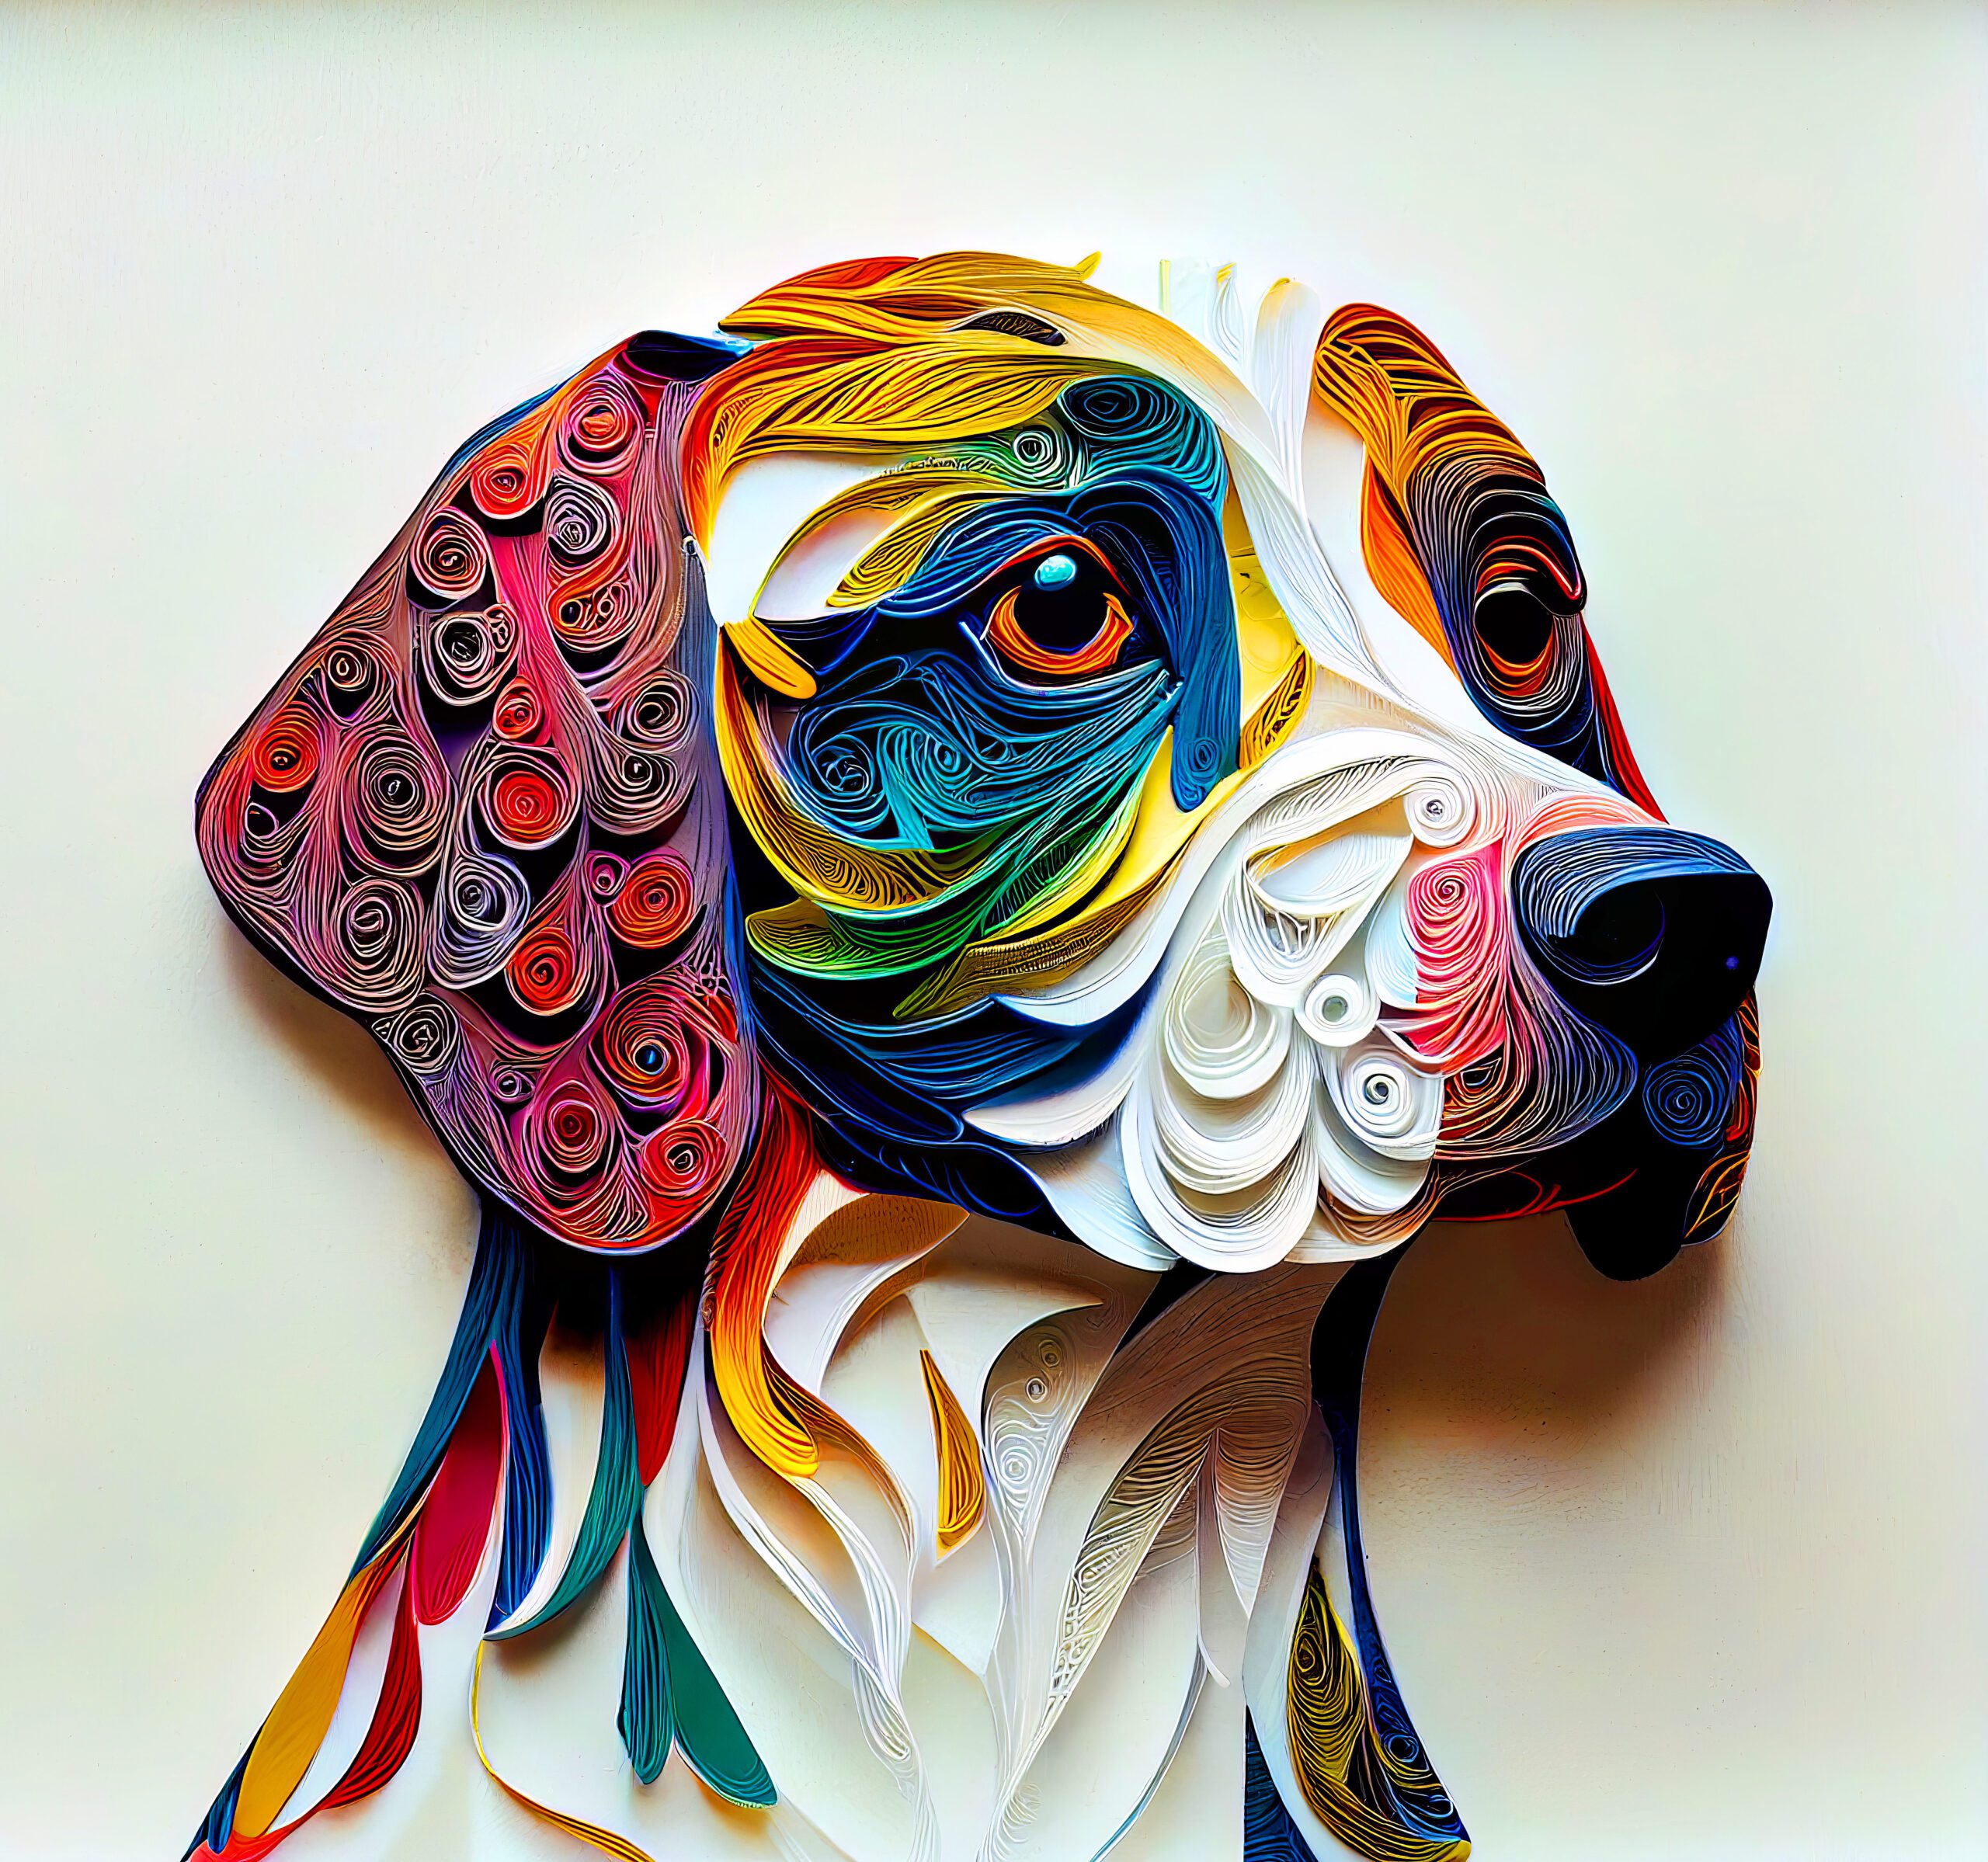 Colorful portrait of a dog with abstract patterns on the face.